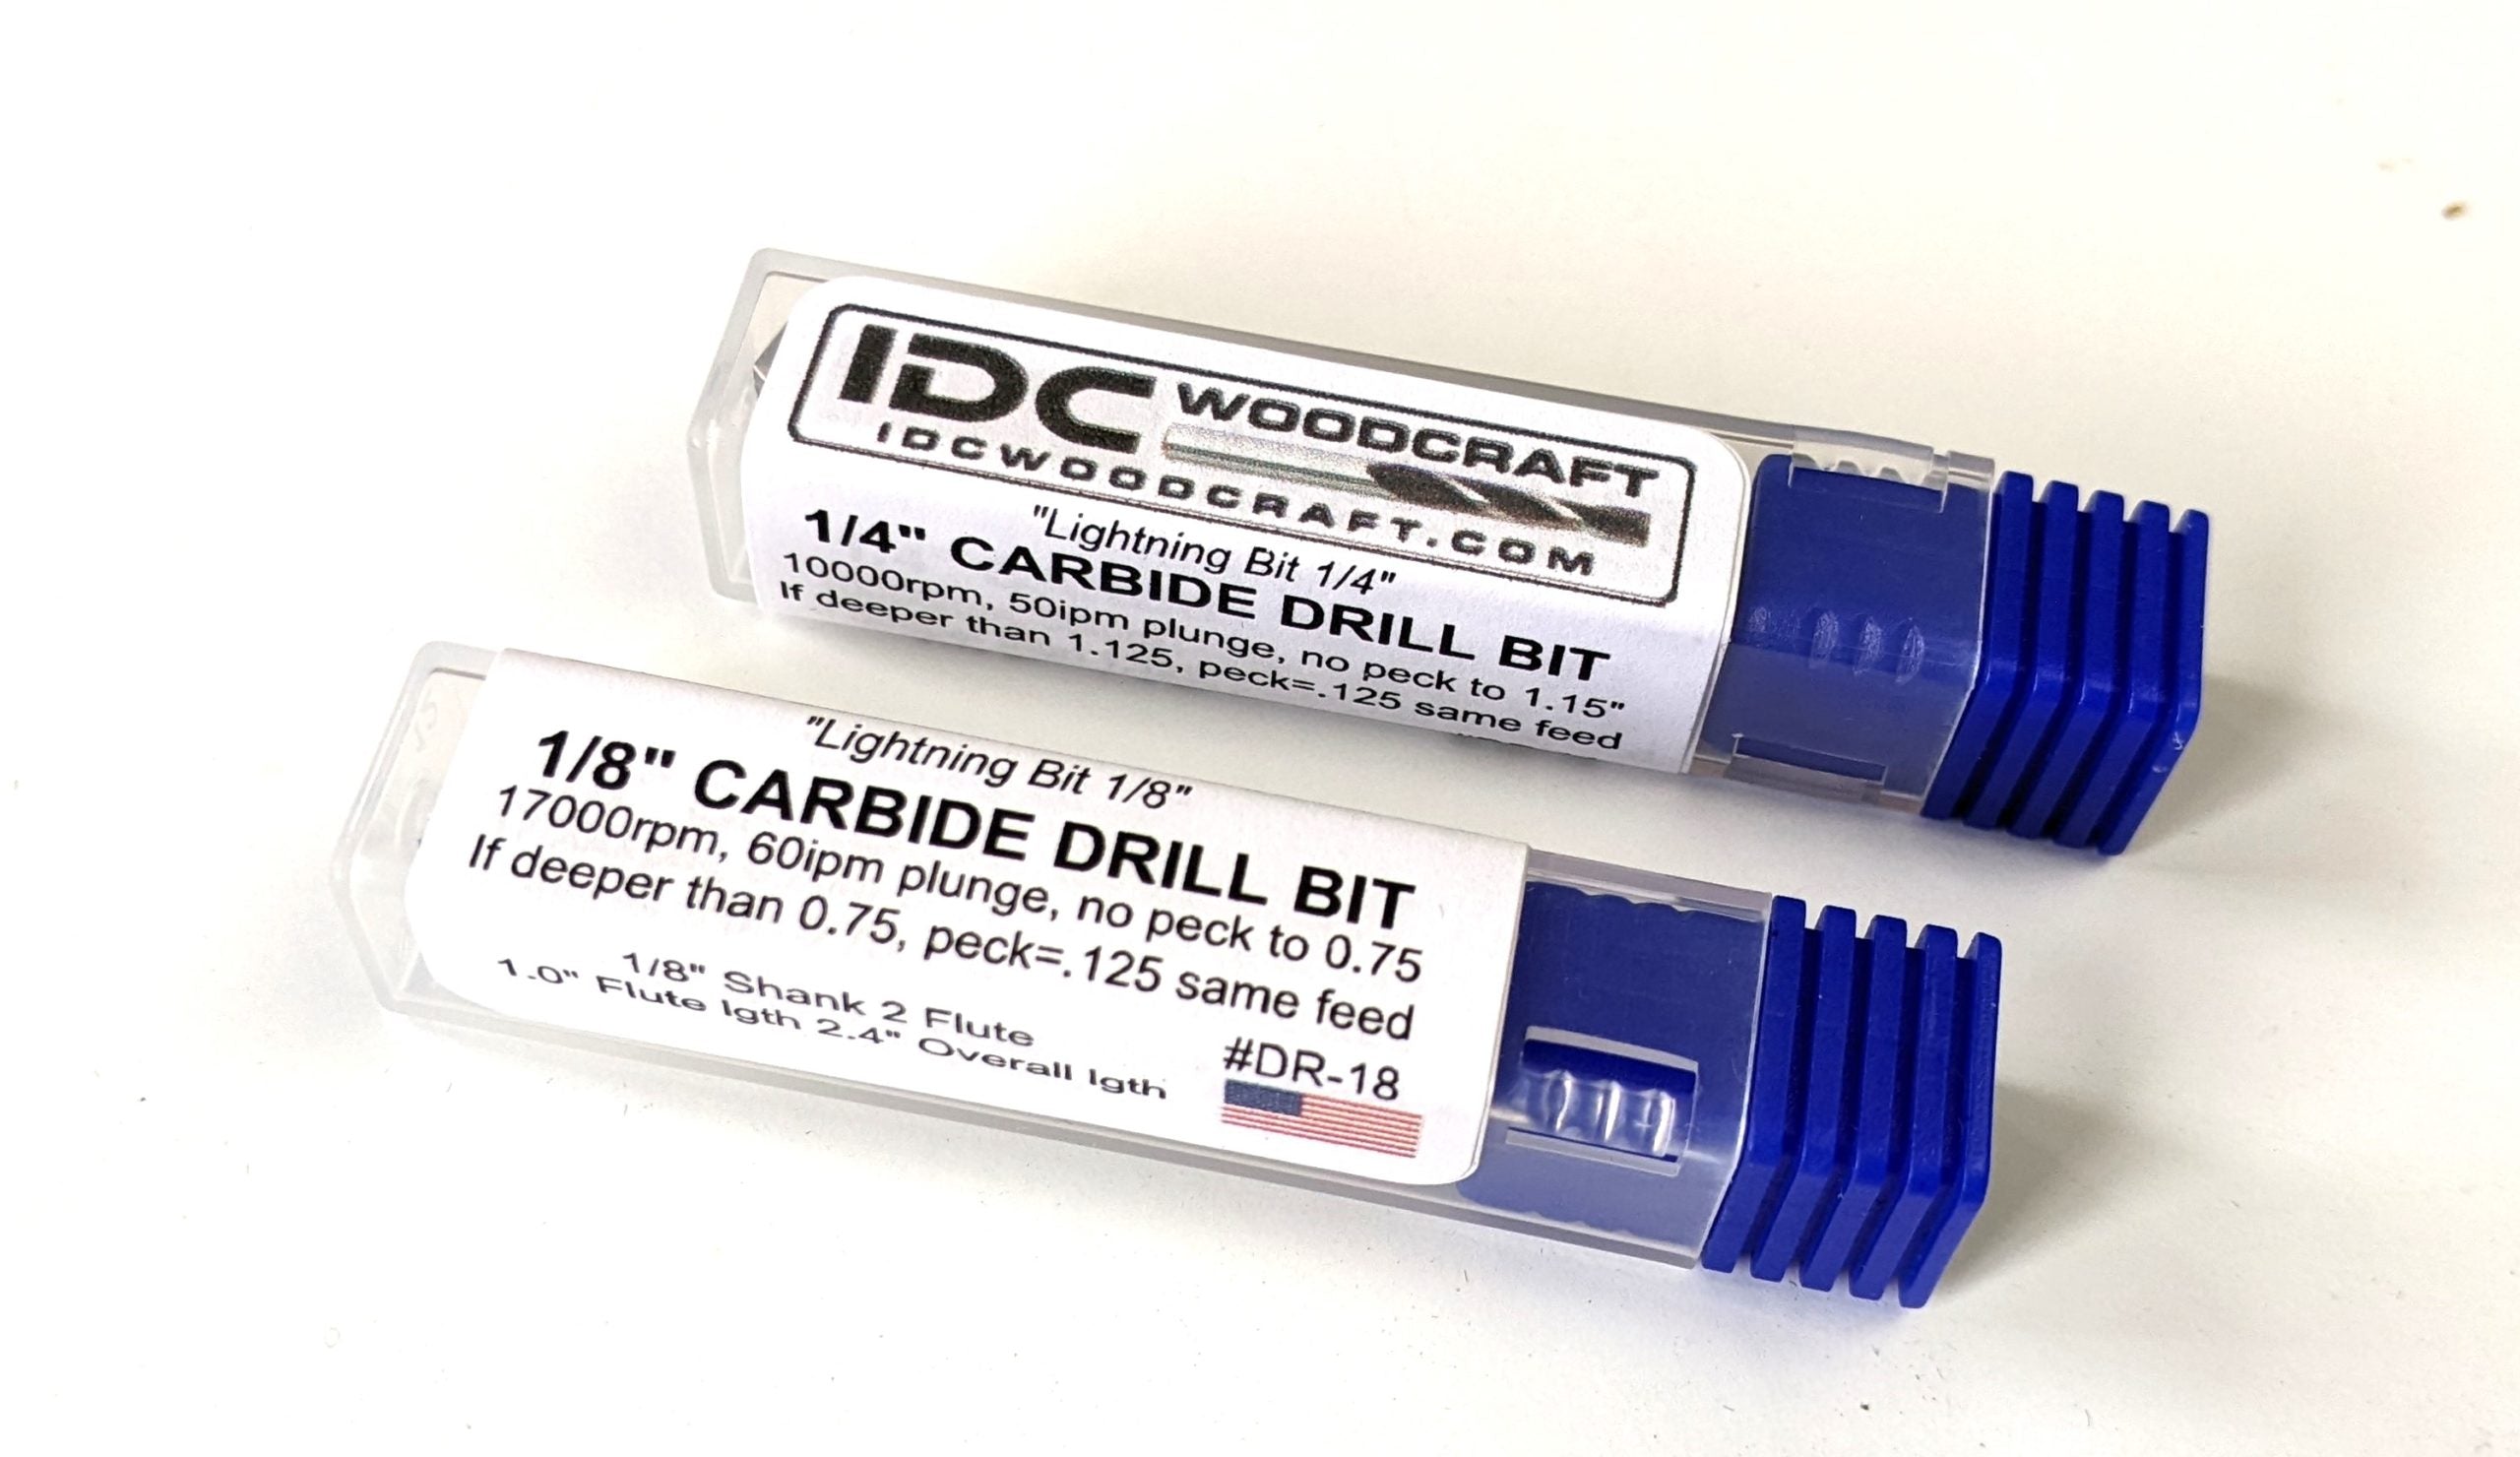 1/8" and 1/4" shank carbide drill bit for cribbage boards by idc woodcraft